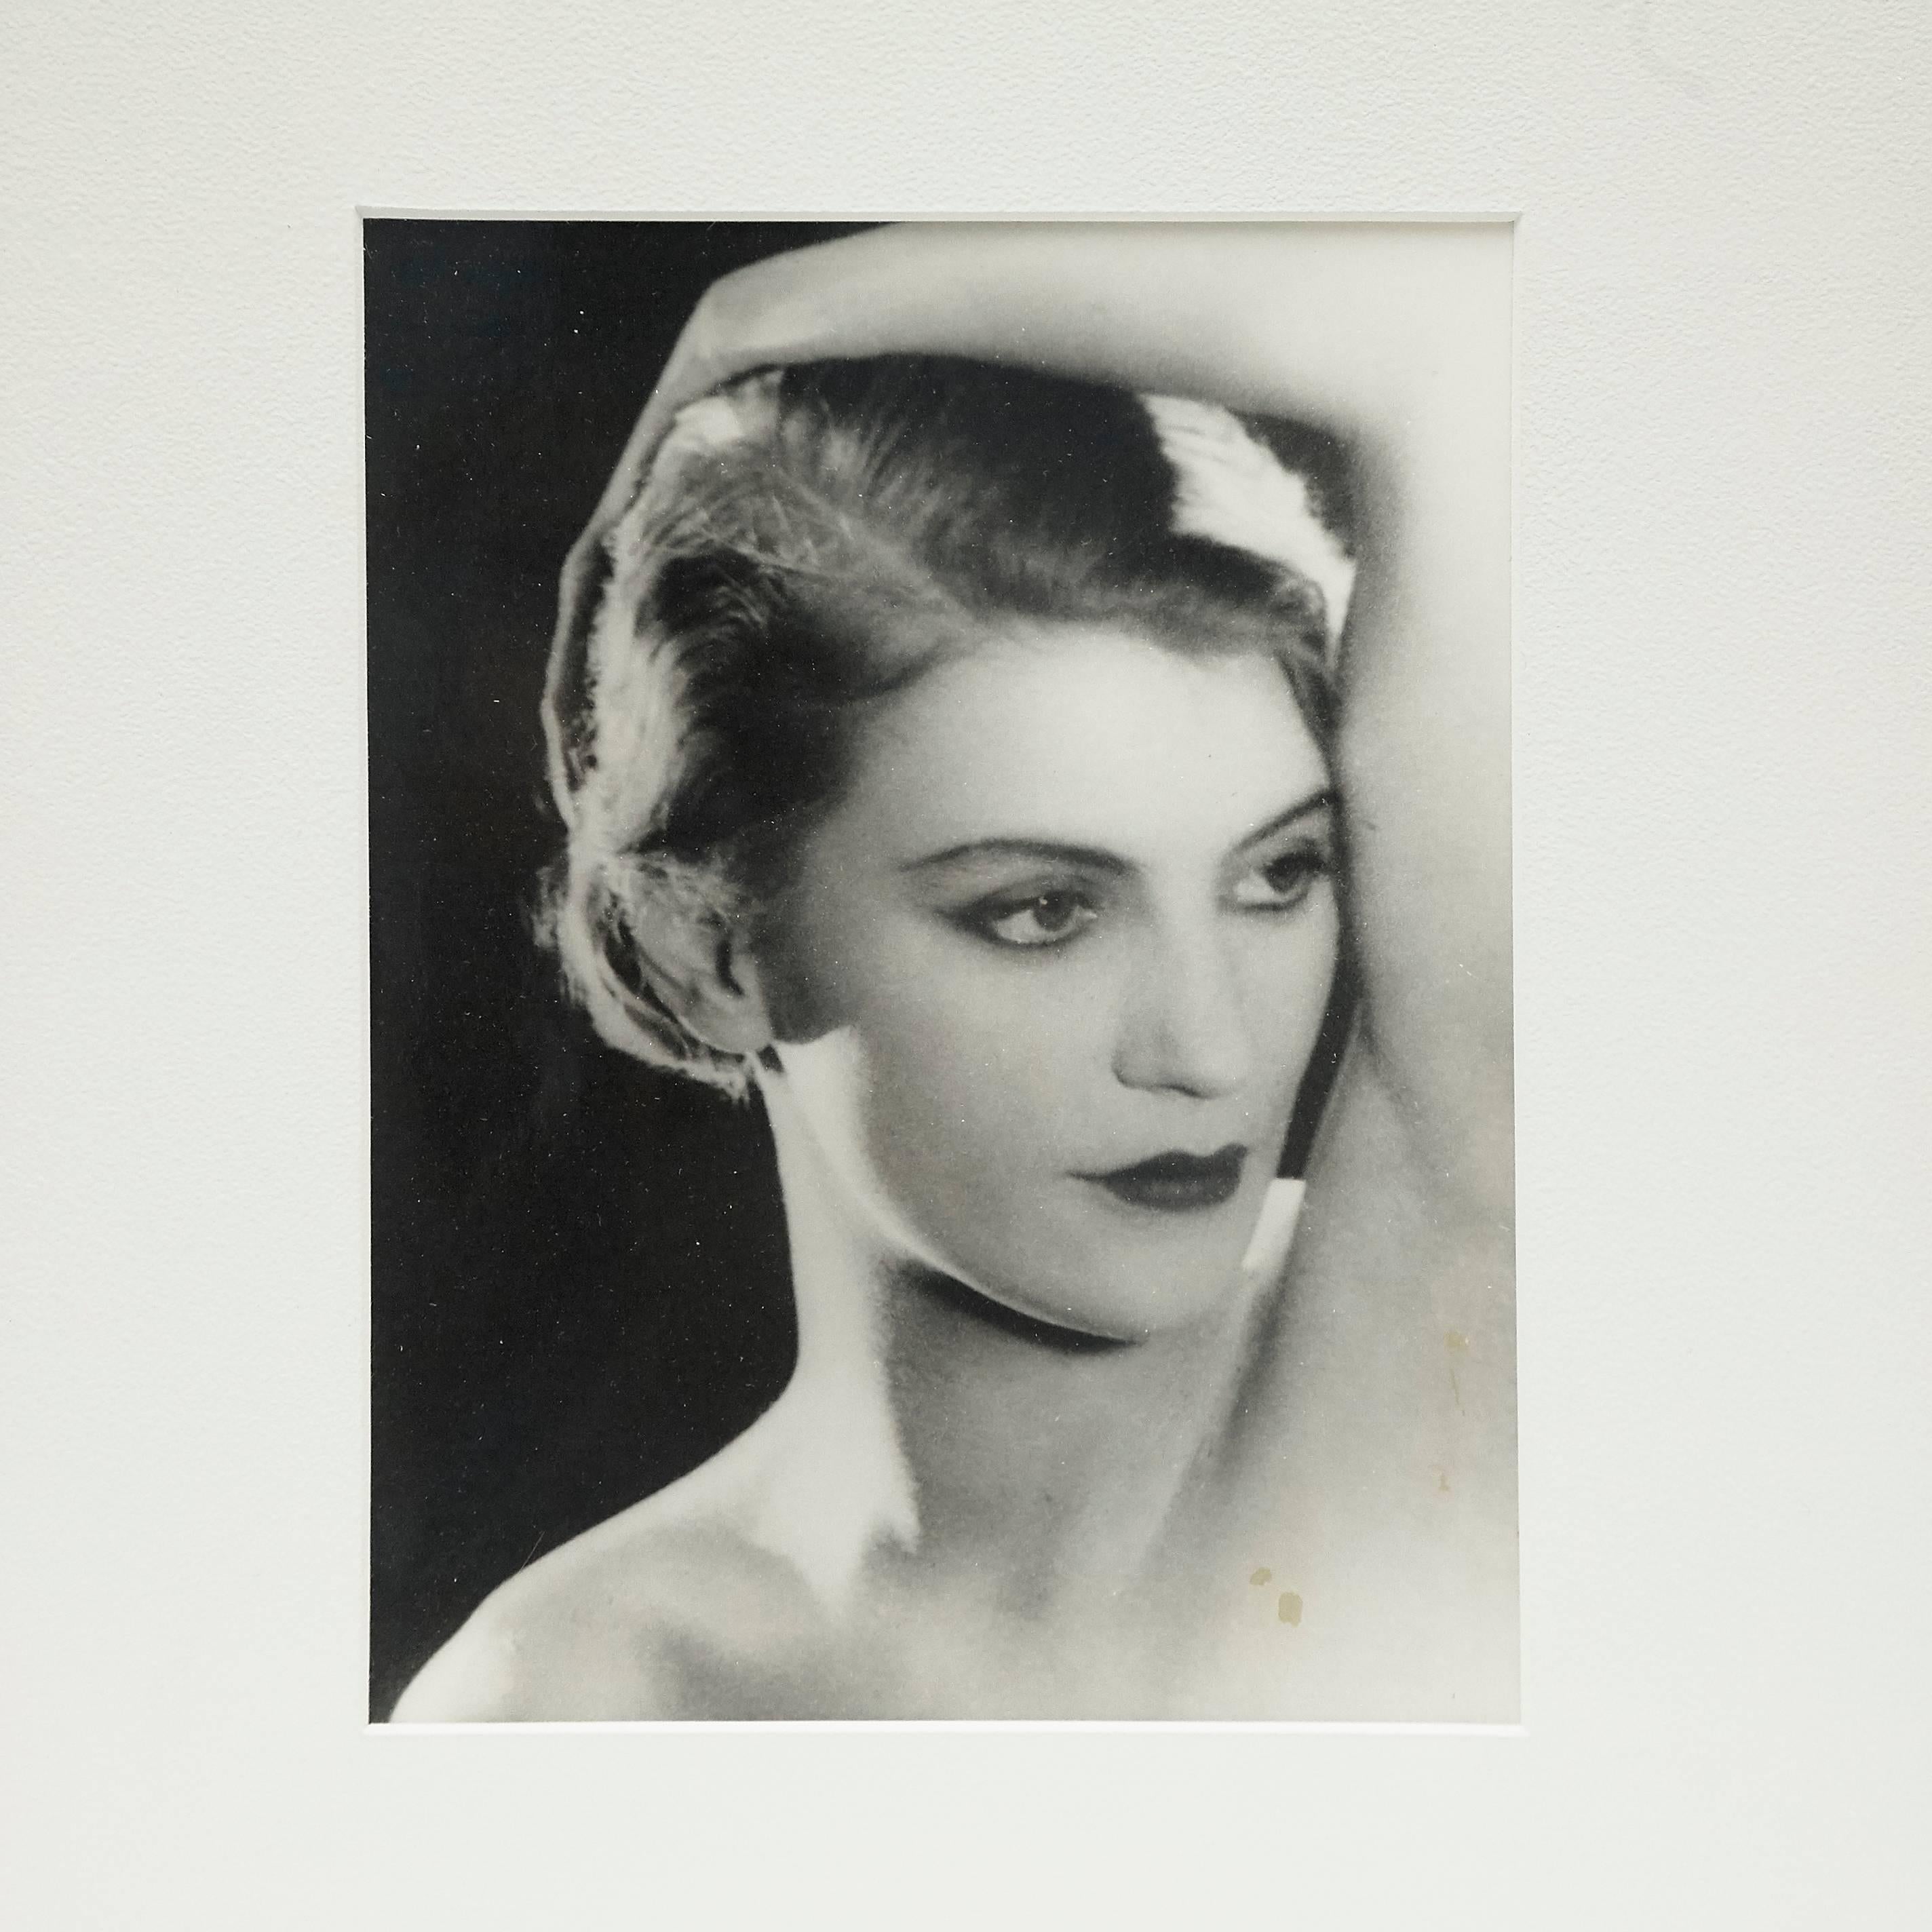 Man Ray Contretype of Lee Miller, 1930.

Framed on a 19th century frame with museum glass.

Man Ray (1890–1976) was an American visual artist who spent most of his career in France. He was a significant contributor to the Dada and Surrealist